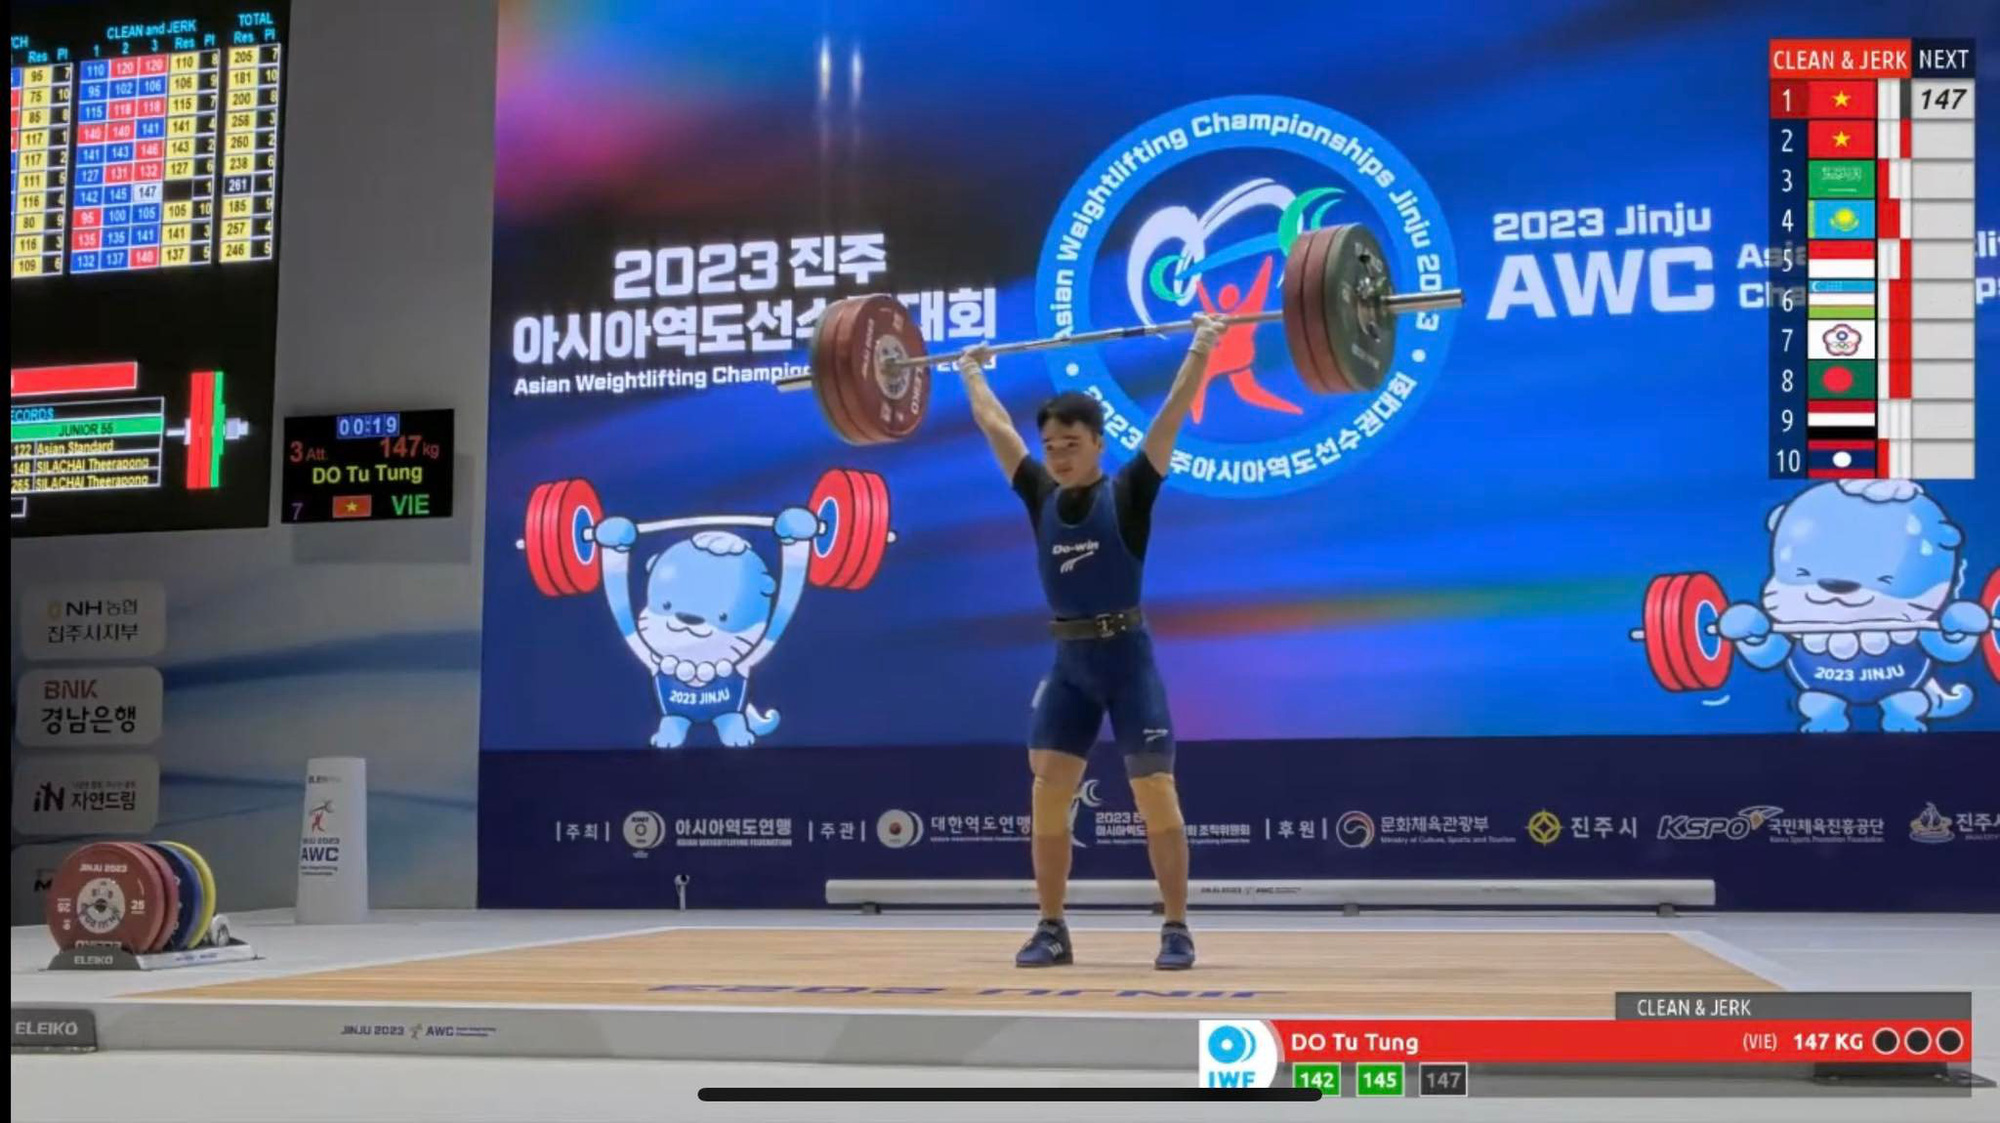 This screenshot shows Vietnamese 18-year-old Do Tu Tung in action in the men’s 55-kilogram category at the 2023 Asian Weightlifting Championships in South Korea, May 5, 2023.